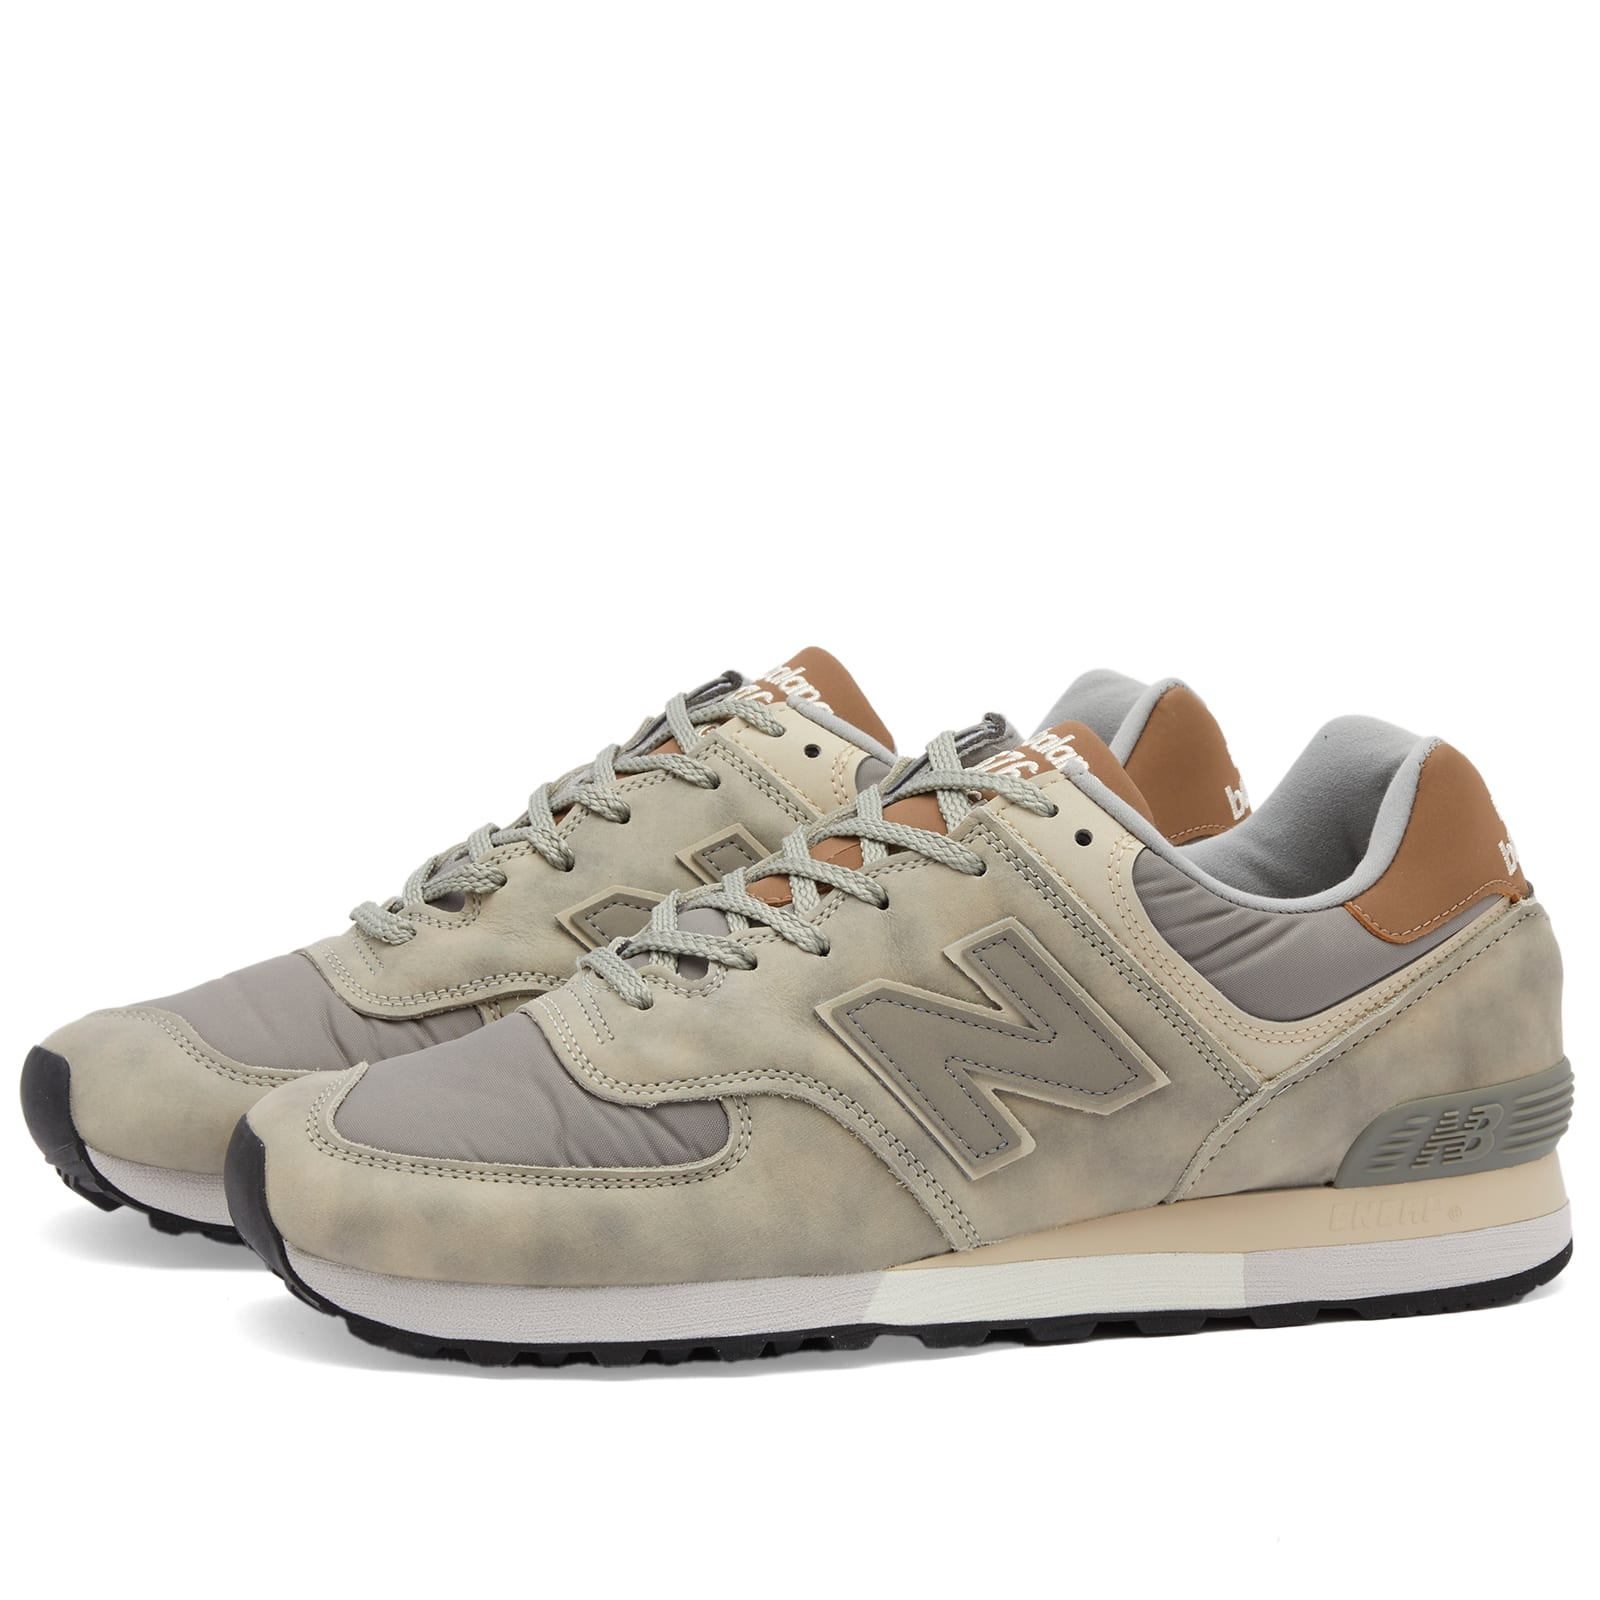 New Balance OU576GT - Made in UK - 1